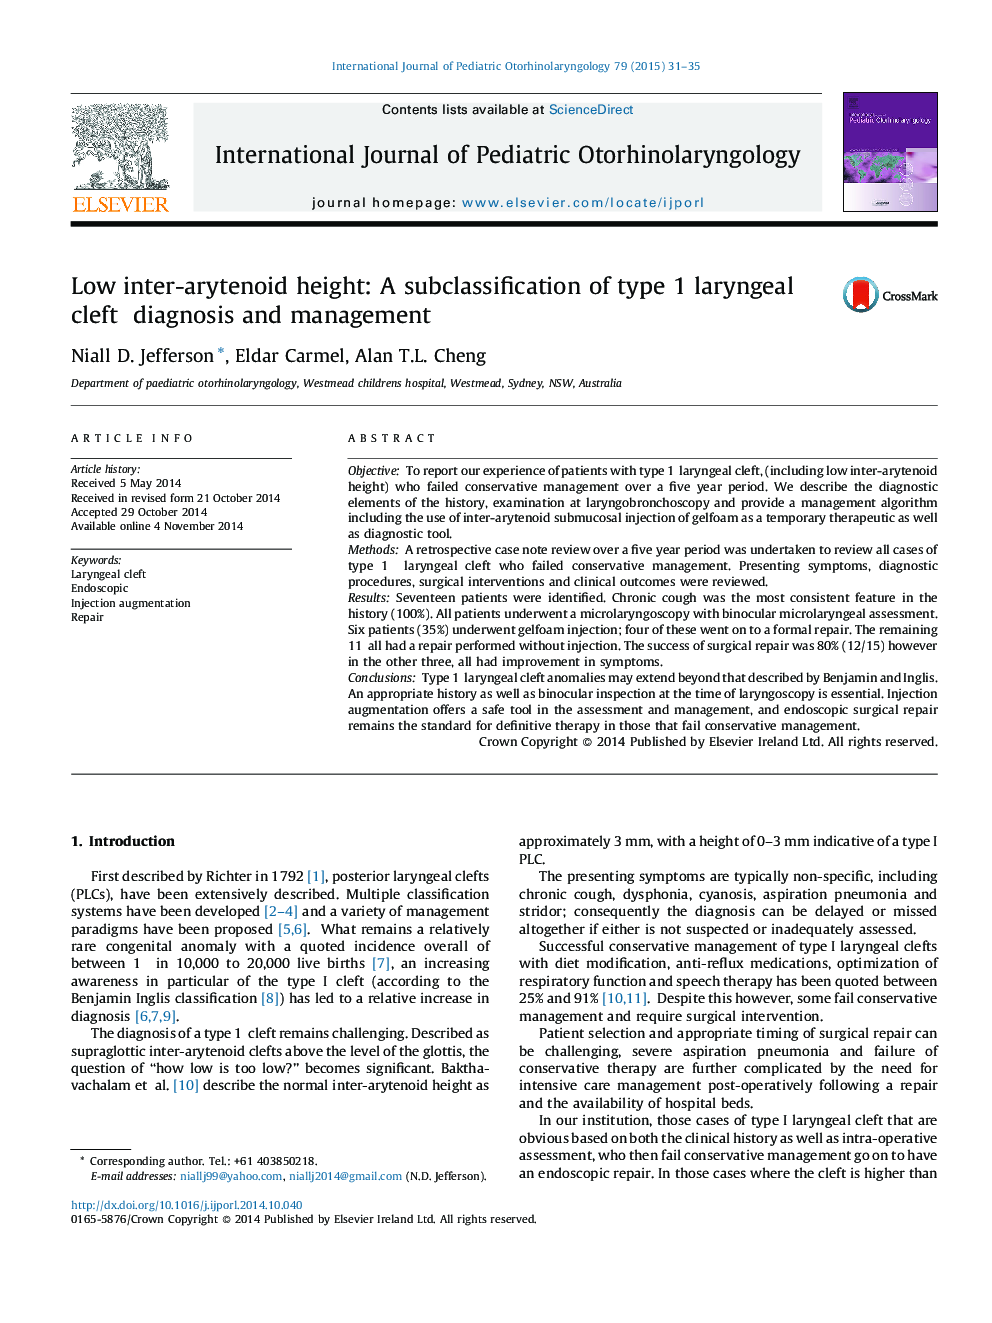 Low inter-arytenoid height: A subclassification of type 1 laryngeal cleft diagnosis and management